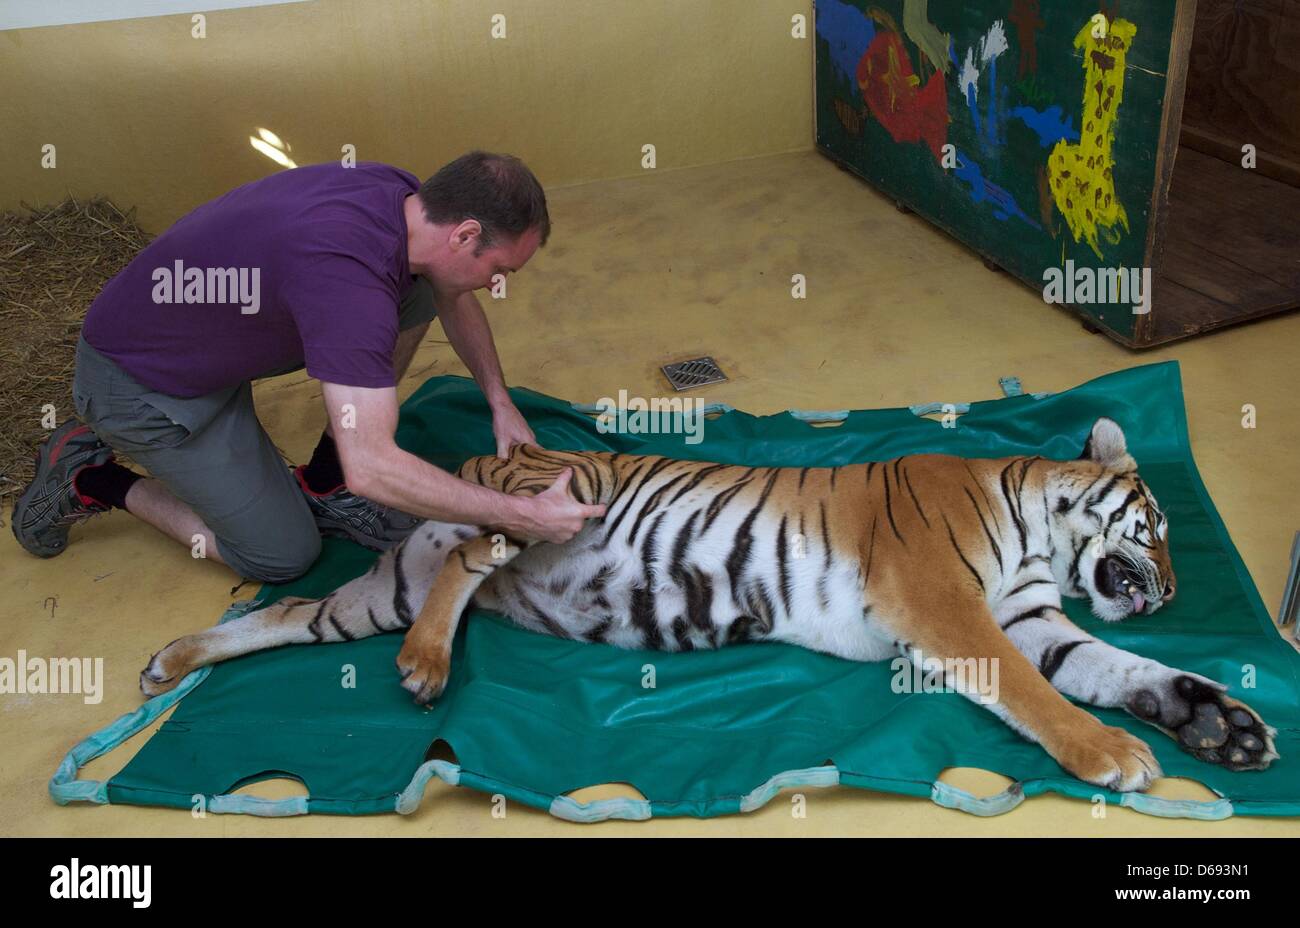 Nine-year-old tiger 'Girl' of the Berzoo Halle receives a medical examination from professor Peter Boettcher of hospital for small animals of the Leipzig University in her compound in Halle, Germany, 28 July 2012. The Malayan tiger (Panthera tigris jacksoni) received an artificial hip joint on 23 January 2012 and the outcome of the operation is examined regularly. Photo: Peter Endi Stock Photo